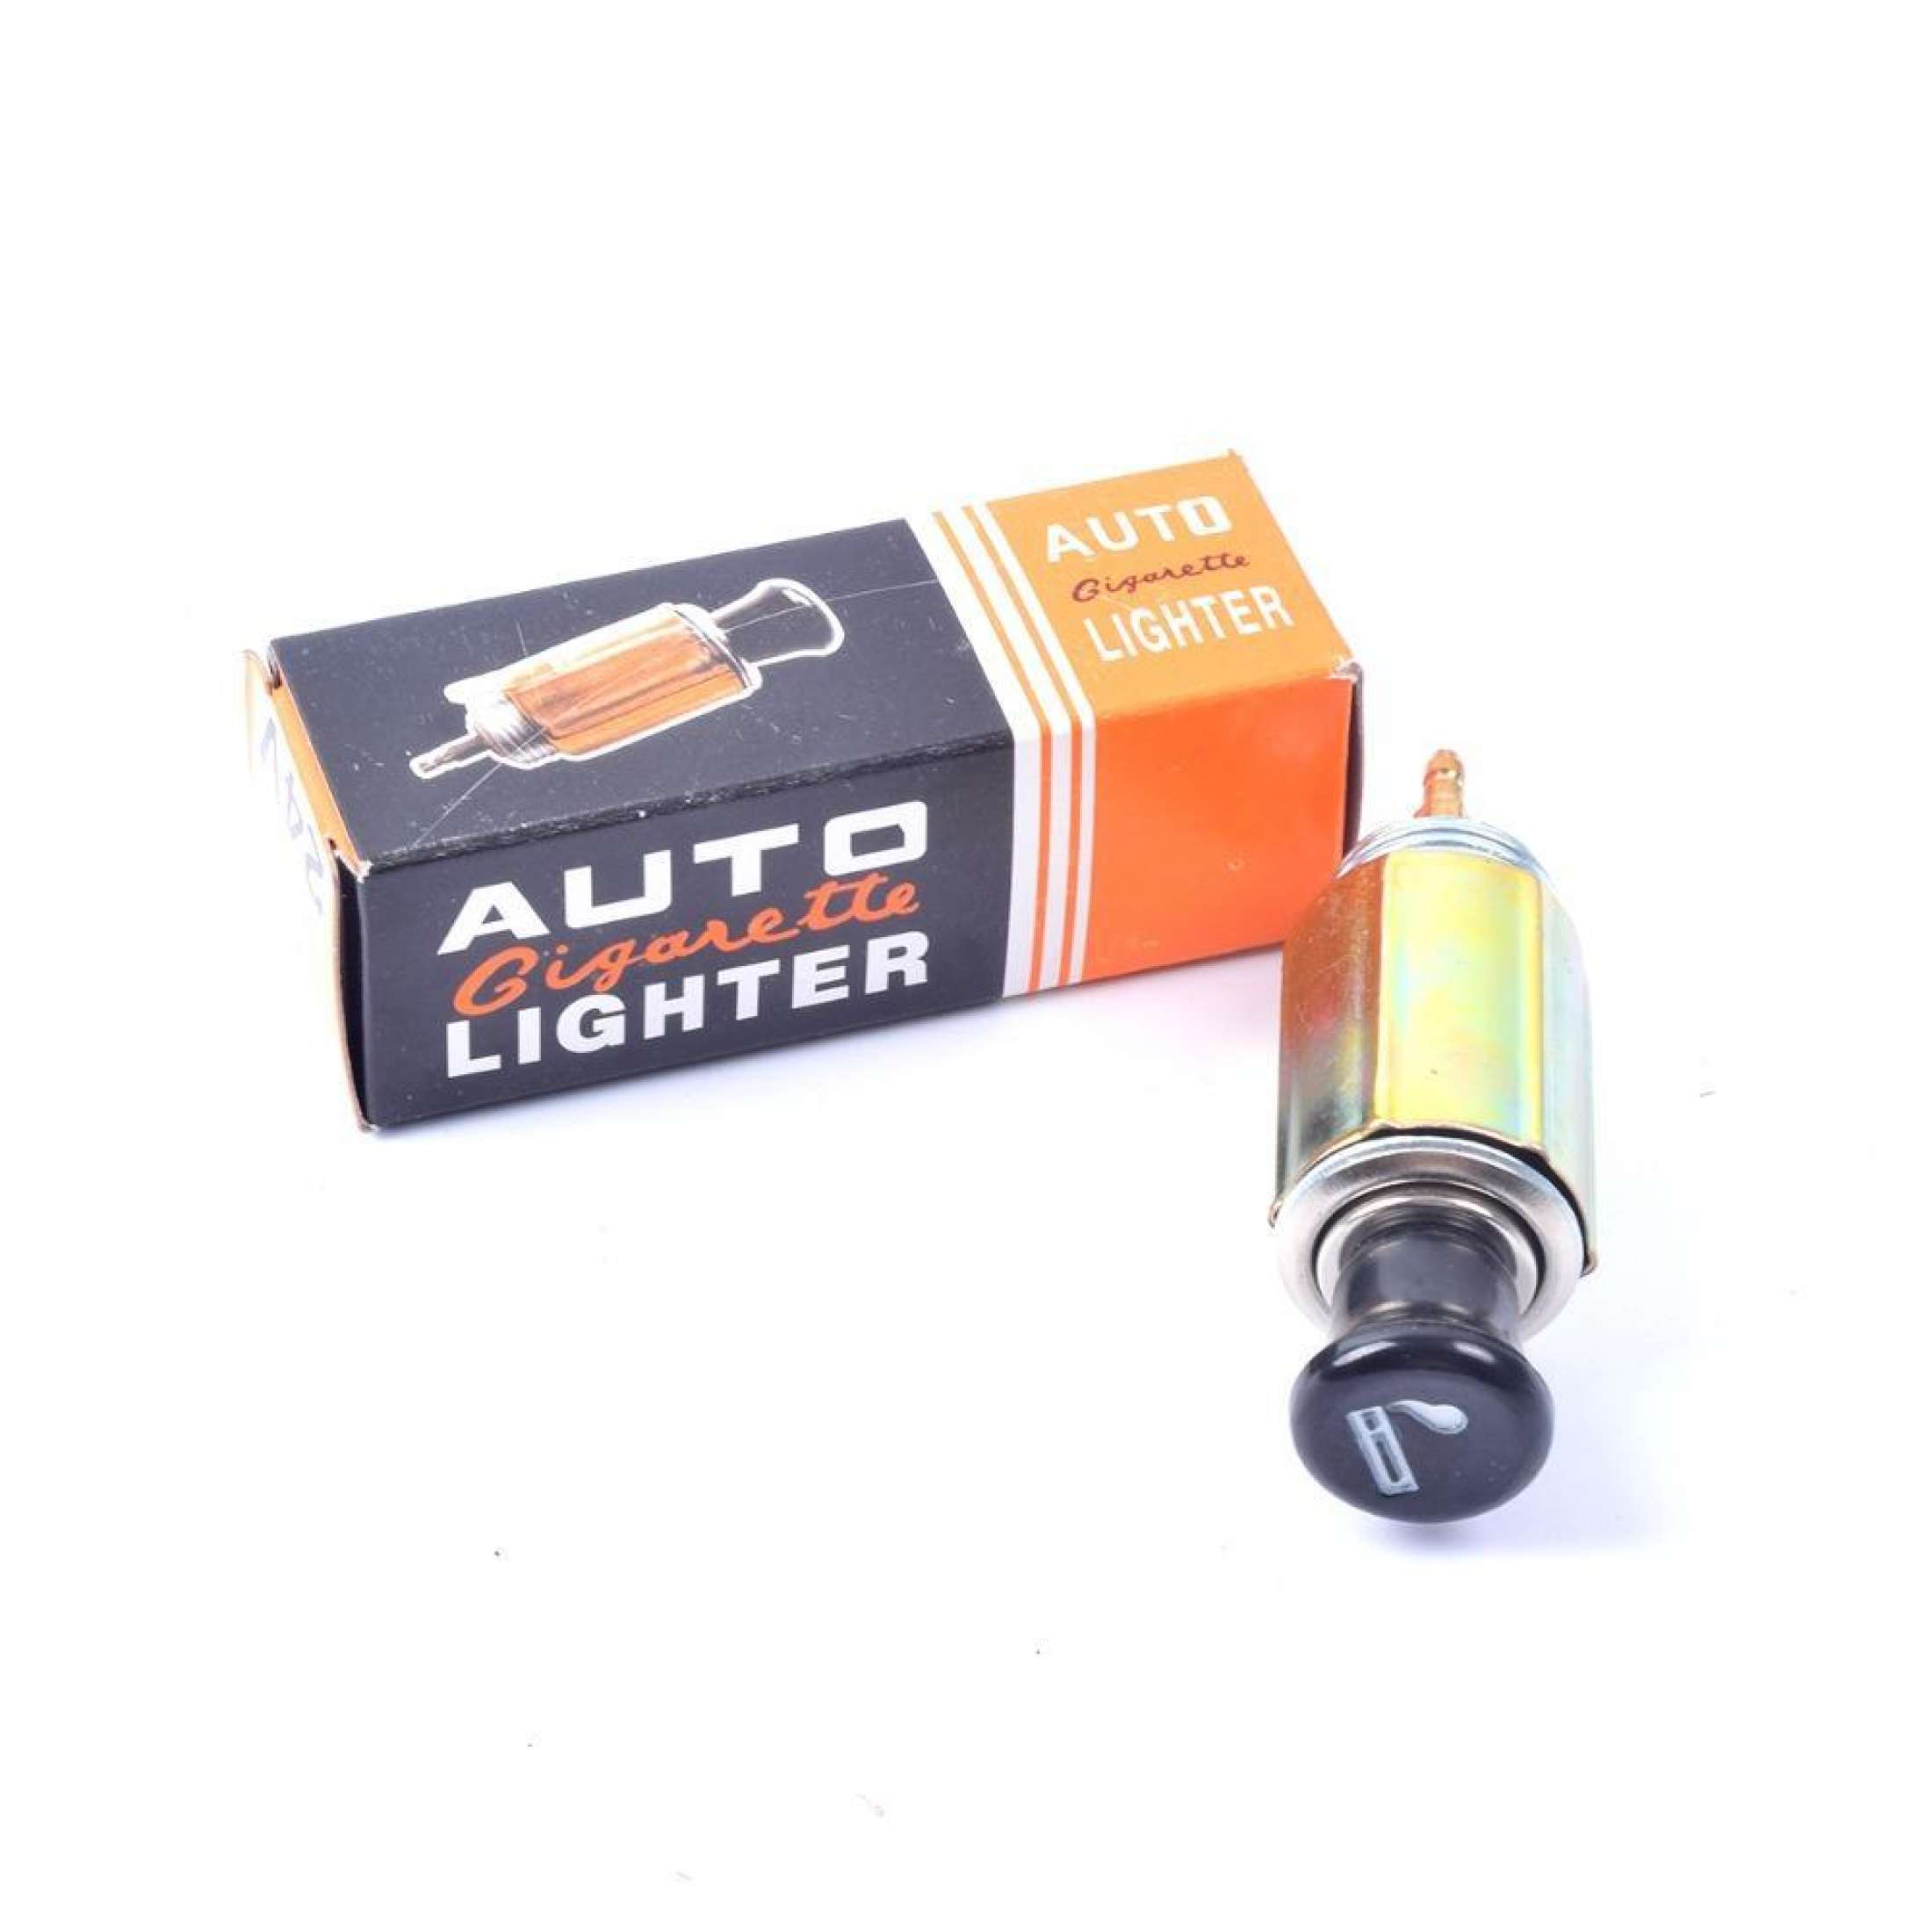 Auto Cigarette Lighter Universal For 12V Volt Vehicle Car - FULL SET Top Head With Base And Wiring